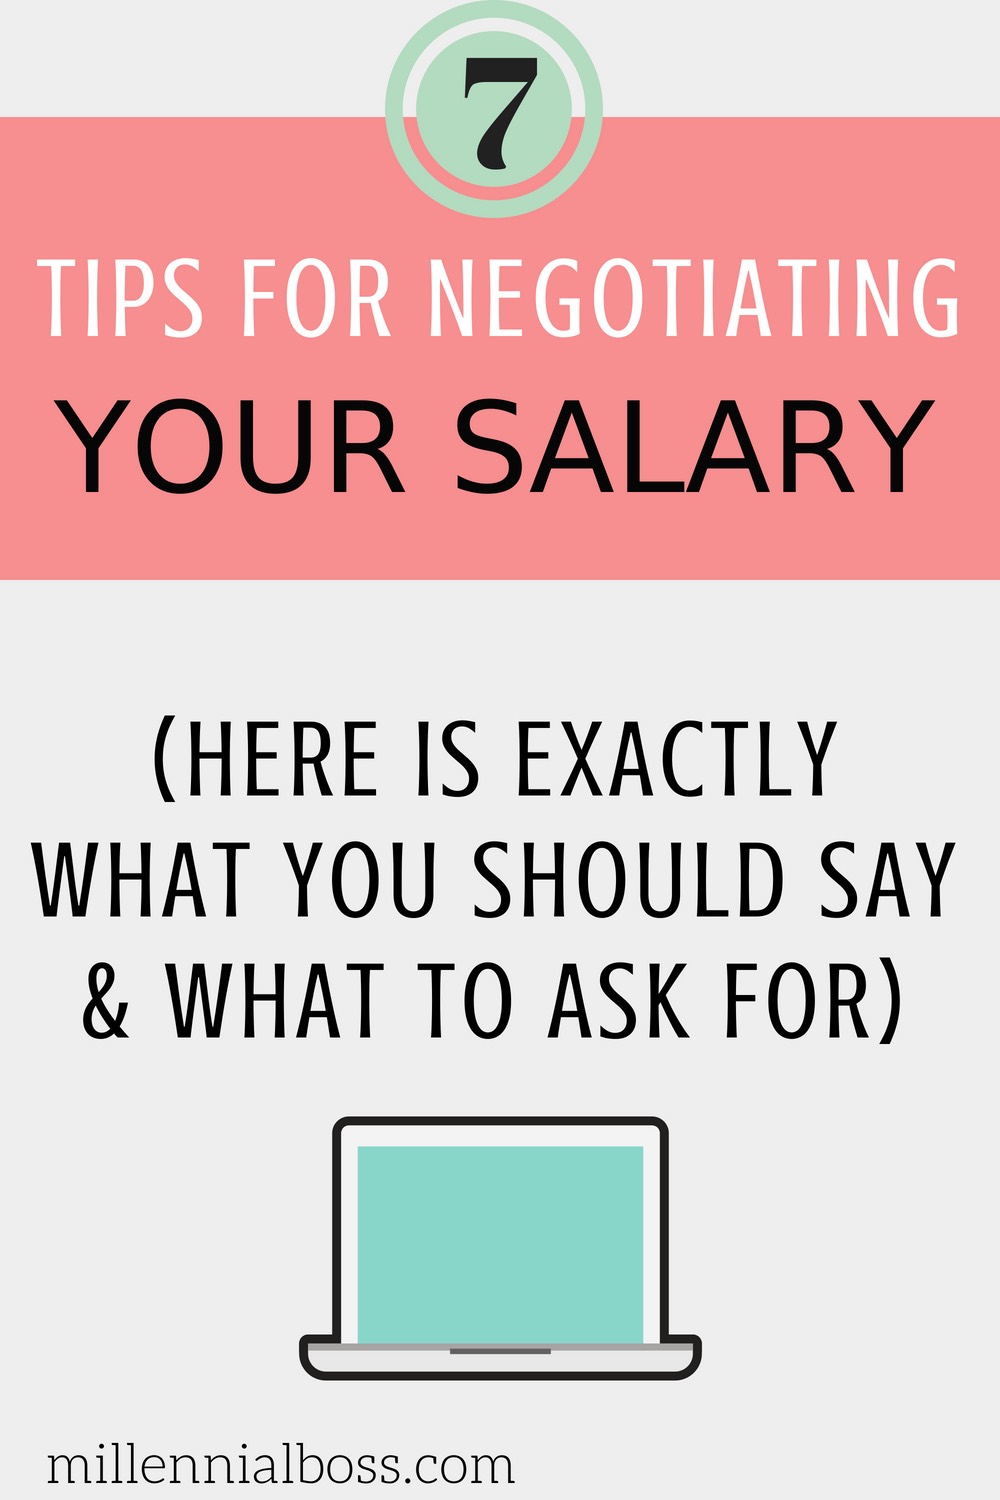 How to Successfully Negotiate Your Salary | You must negotiate your salary to avoid leaving money on the table. I'll show you the exact tips I used to negotiate tens of thousands of dollars in compensation and how you can do it too! #career #salarynegotiation #salarynegotiationtips